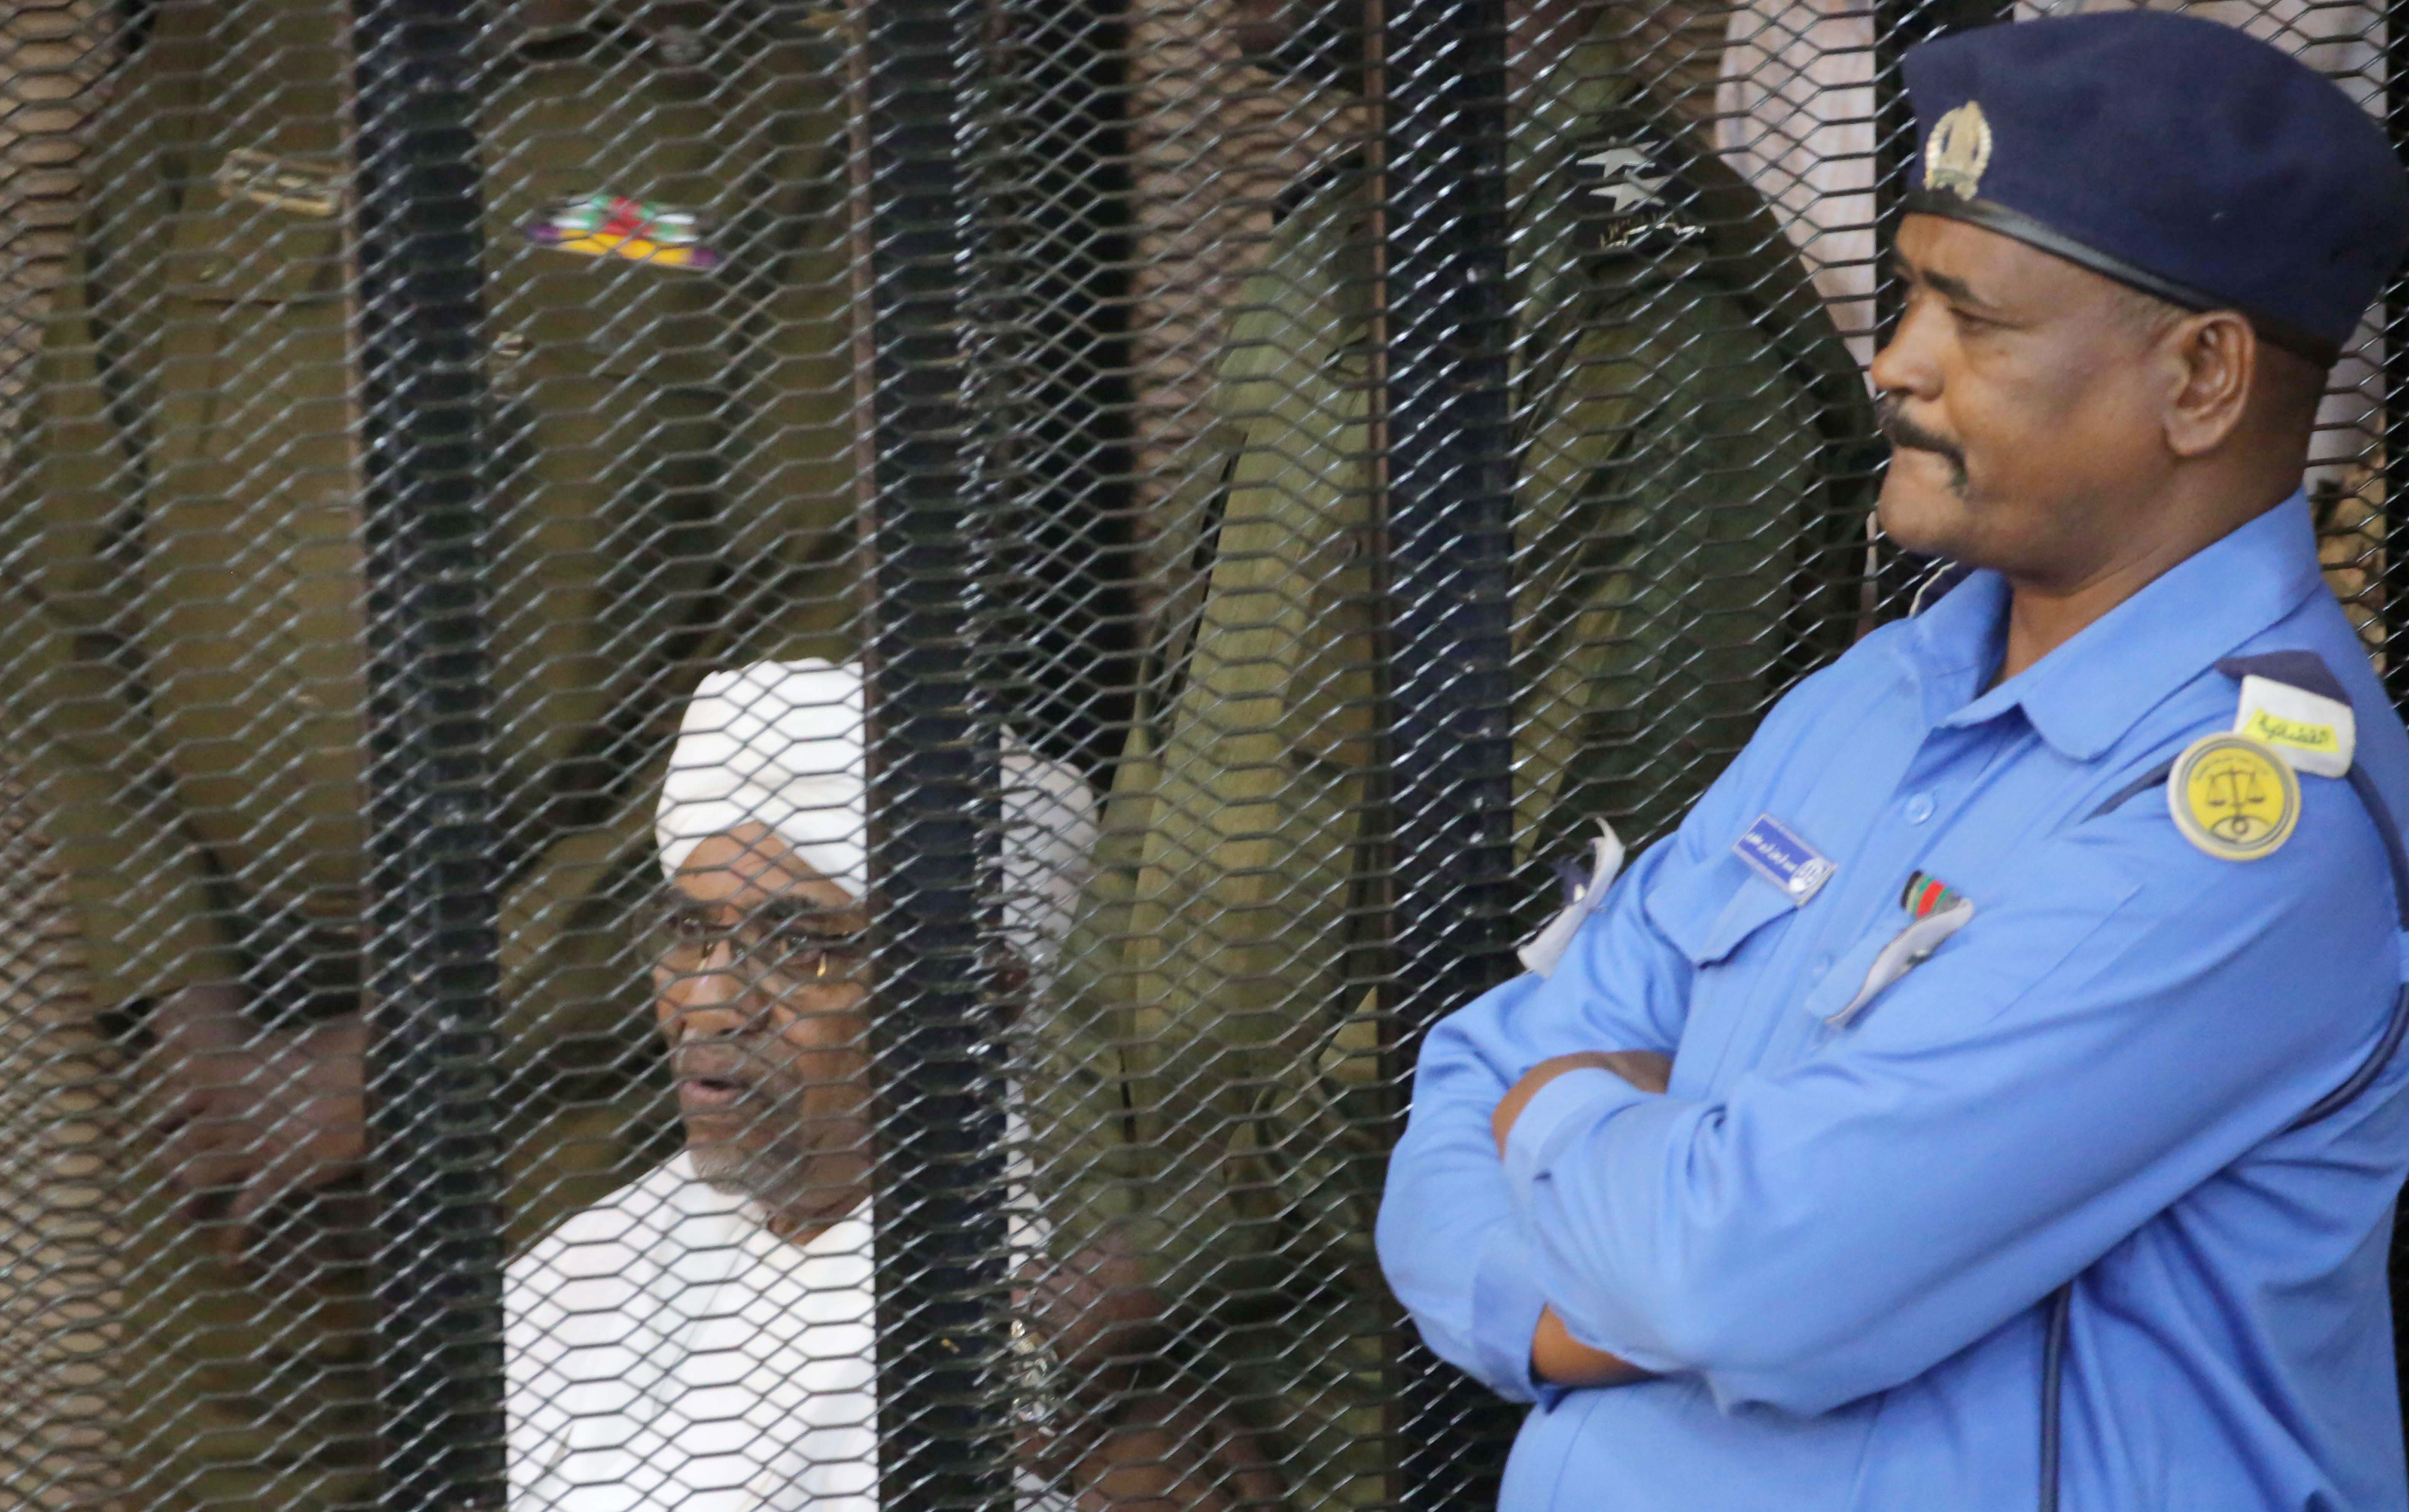 epa07789690 Sudan's ousted President Omar Hassan al-Bashir (L) looks out from inside the accused  cage, during his trial in Khartoum, Sudan, 24 Auguste 2019. Al-Bashir stepped down in April 2019 after the months long uprising which led to hundreds of deaths.  EPA/AMEL PAIN